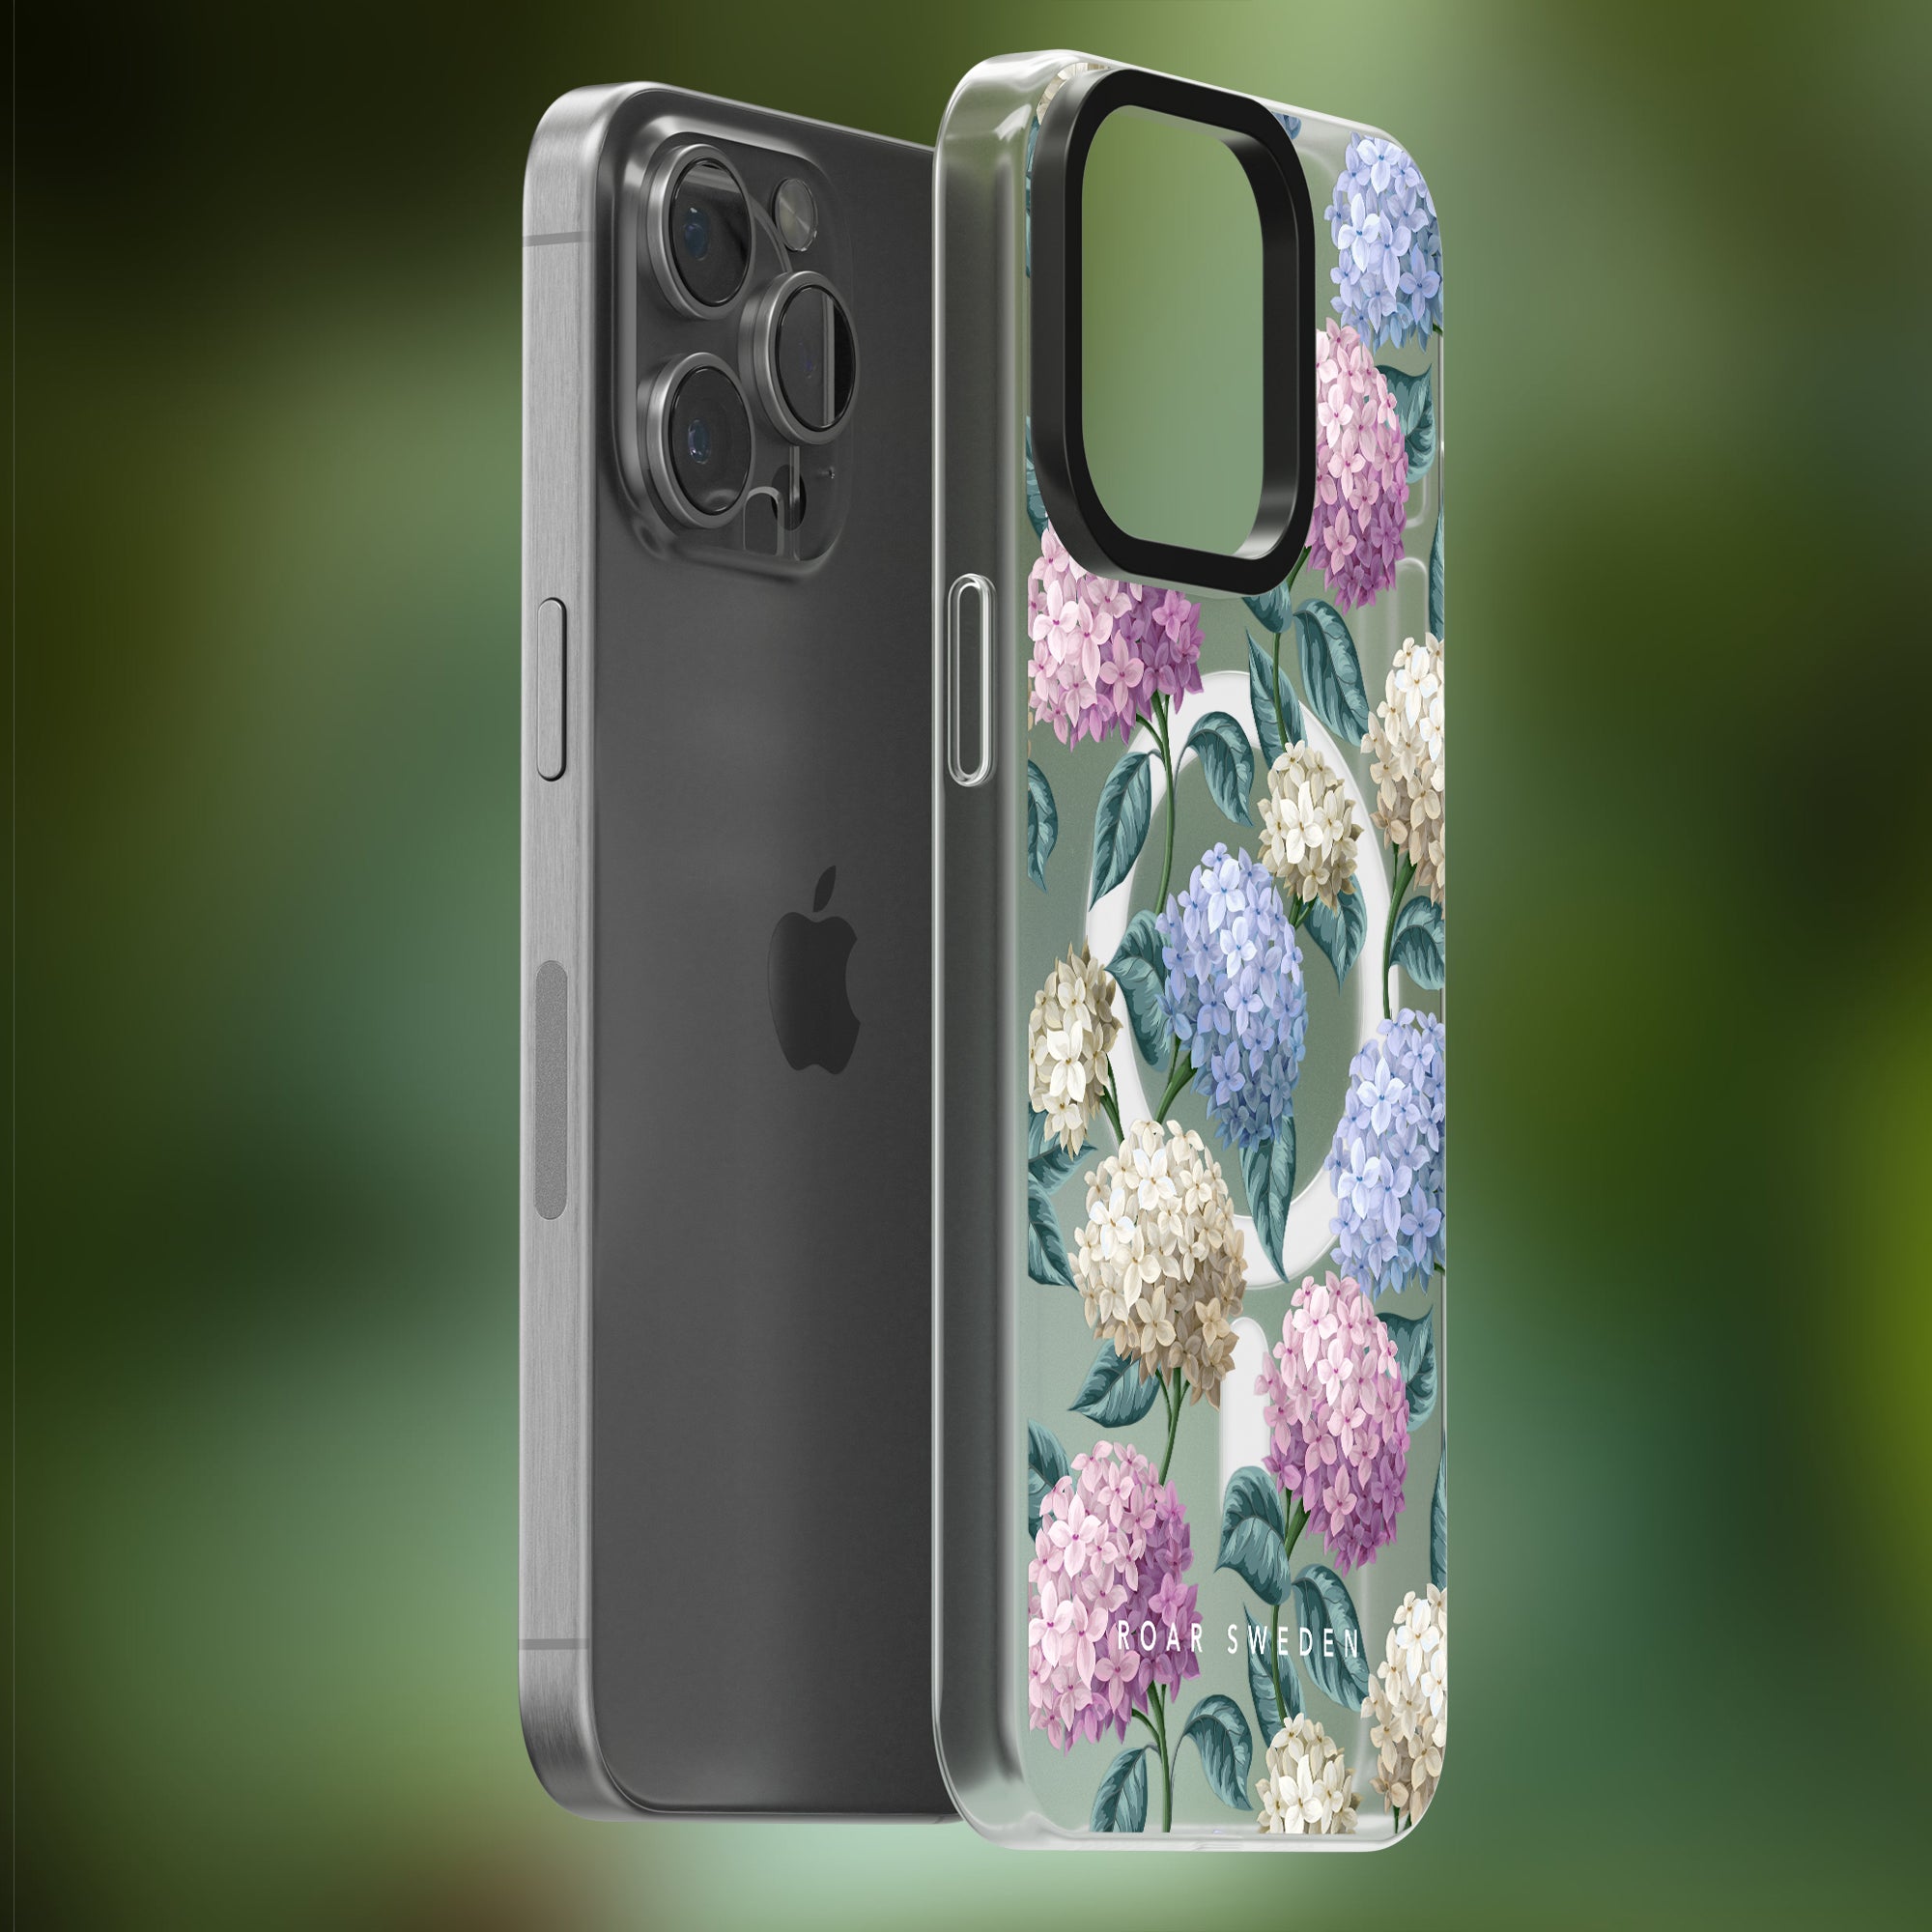 Two smartphones, one in a clear Hydrangea - MagSafe Case with hortensiablommans designs and the other without a case, are displayed against a blurred green background.